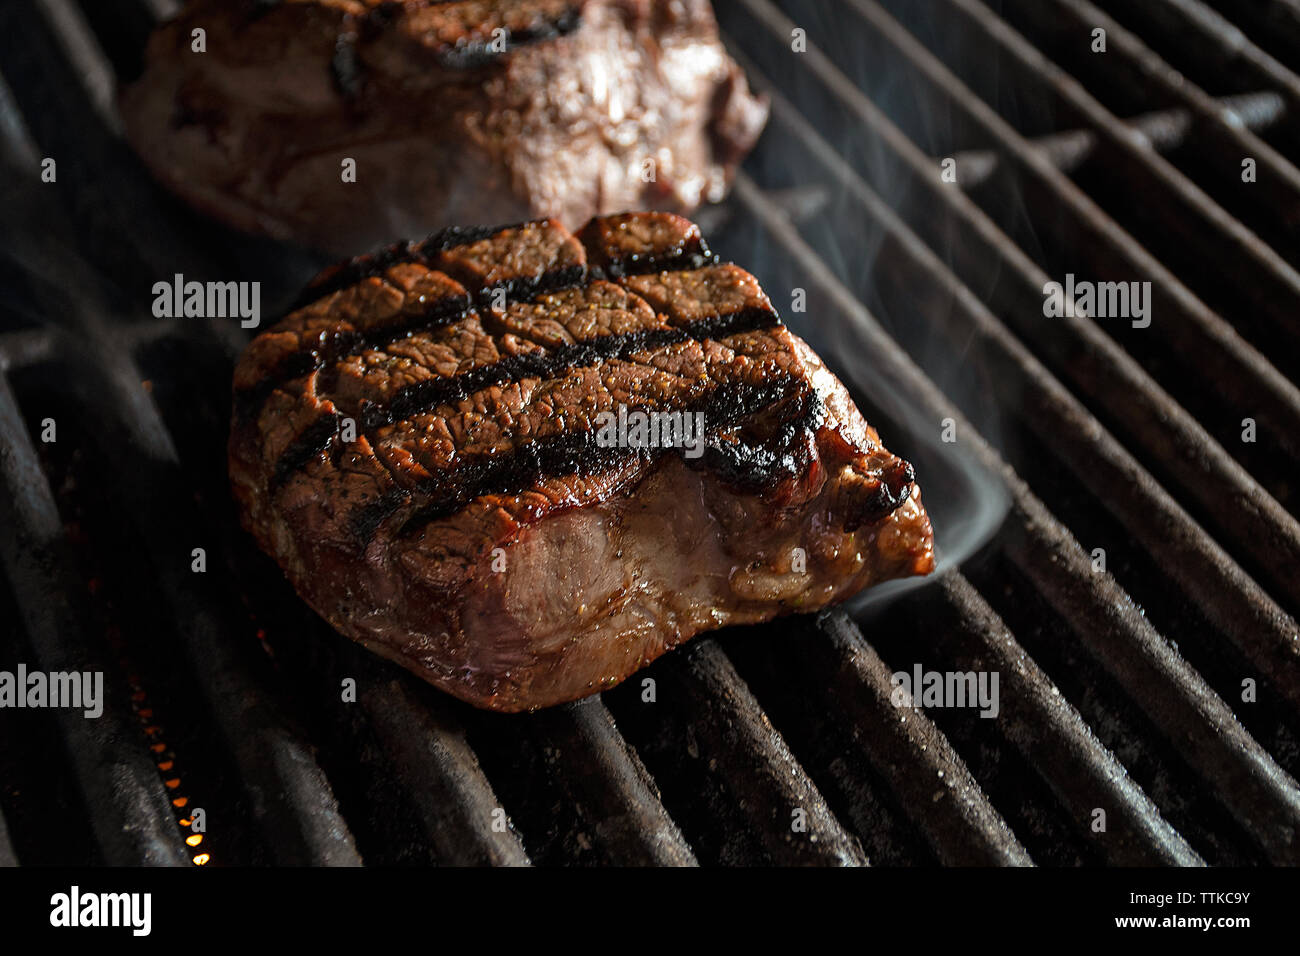 close up of charbroiled filet mignon beef cooking on infrared barbecue grill Stock Photo